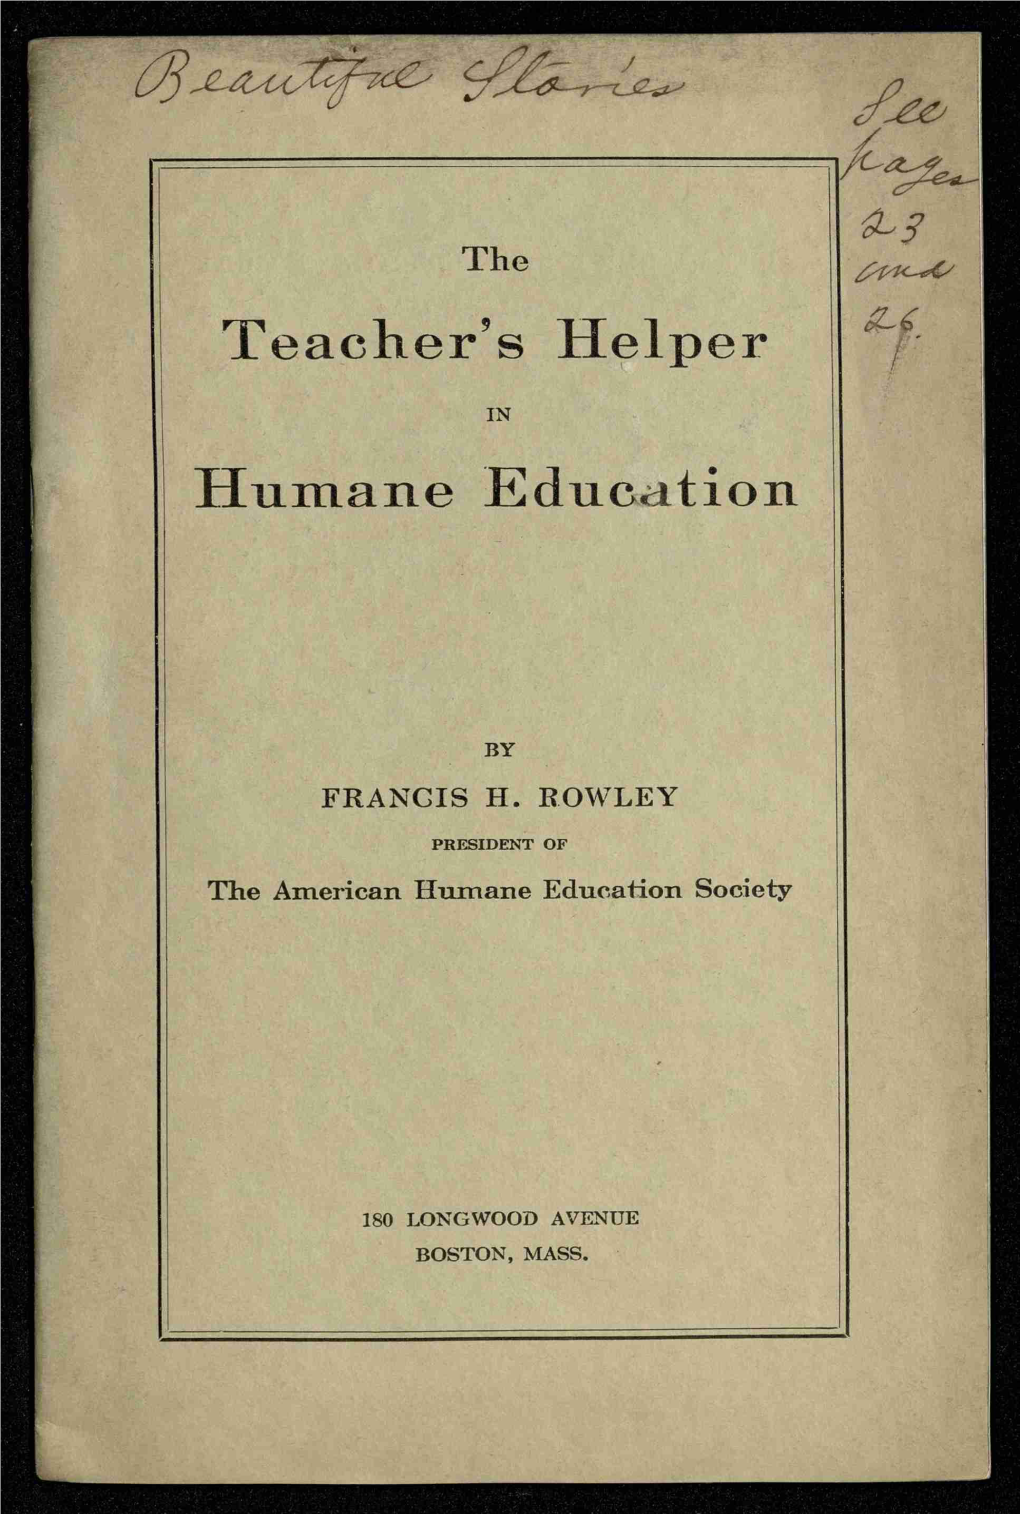 The Teacher's Helper in Humane Education by FRANCIS H. RO